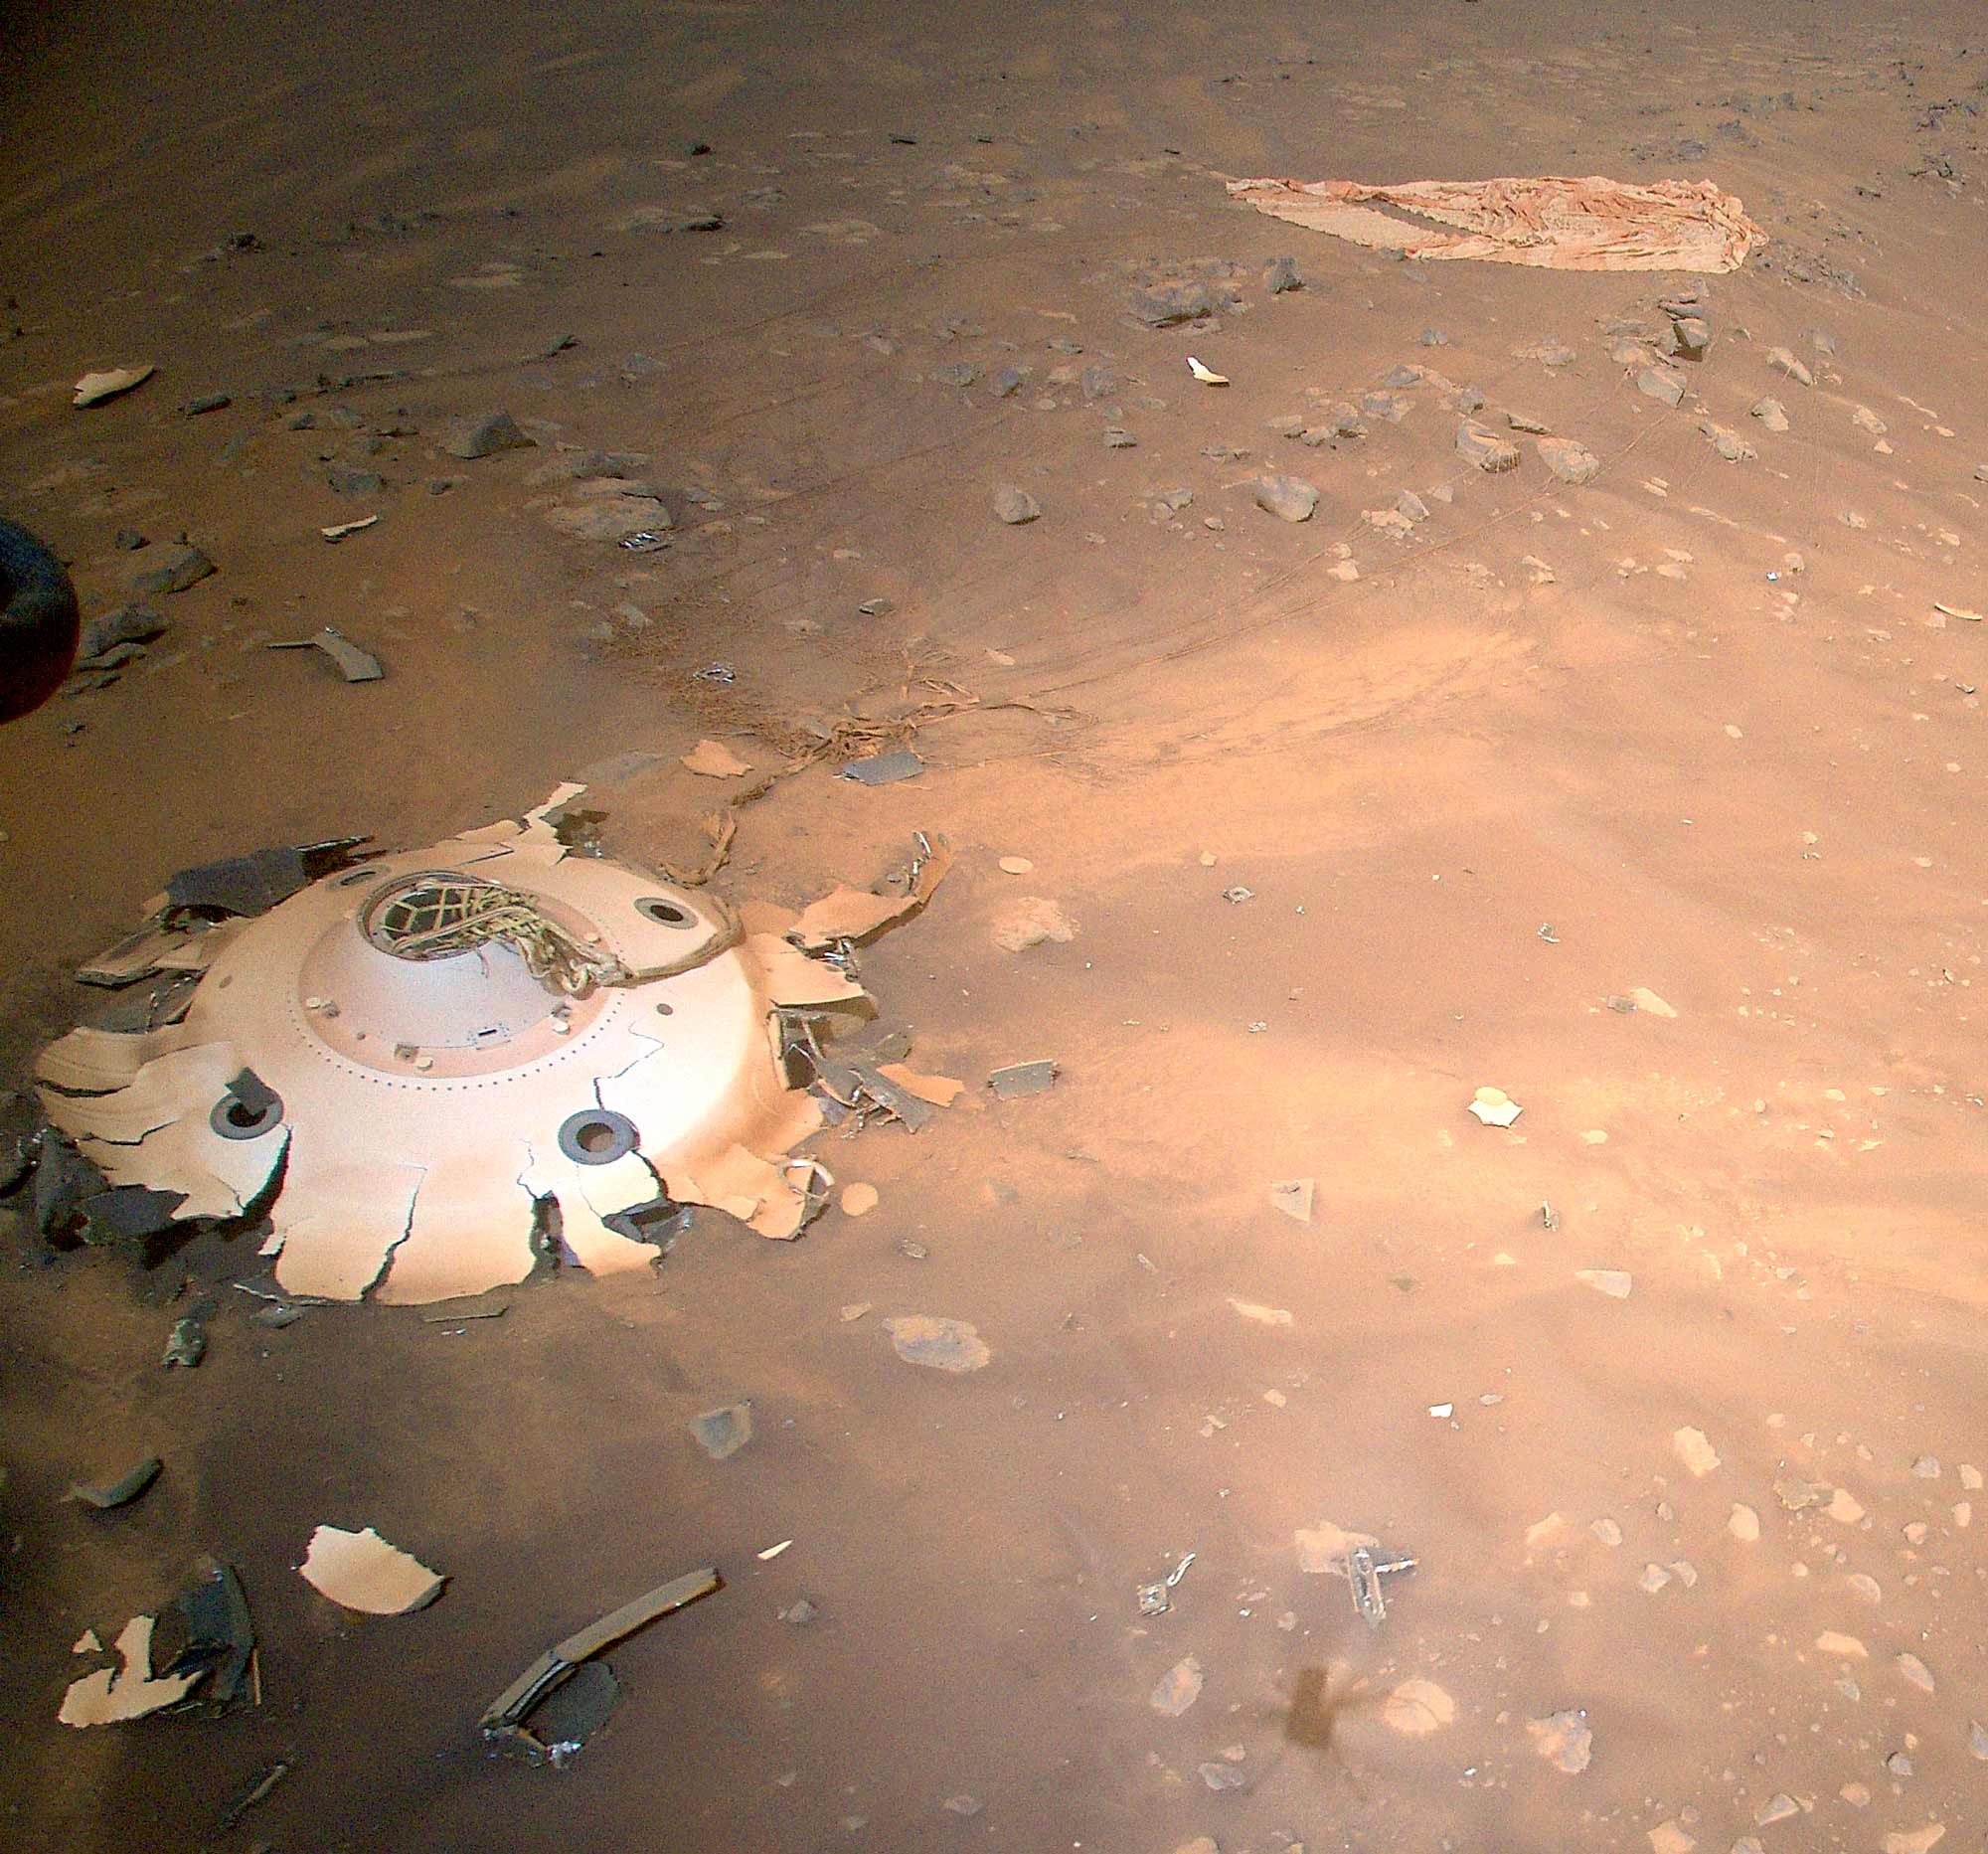 <a href="https://www.cnn.com/2022/04/28/world/mars-ingenuity-helicopter-landing-gear-scn/index.html" target="_blank">Debris</a> from the gear that helped land the Perseverance rover on Mars was spotted by the Ingenuity helicopter on April 19.